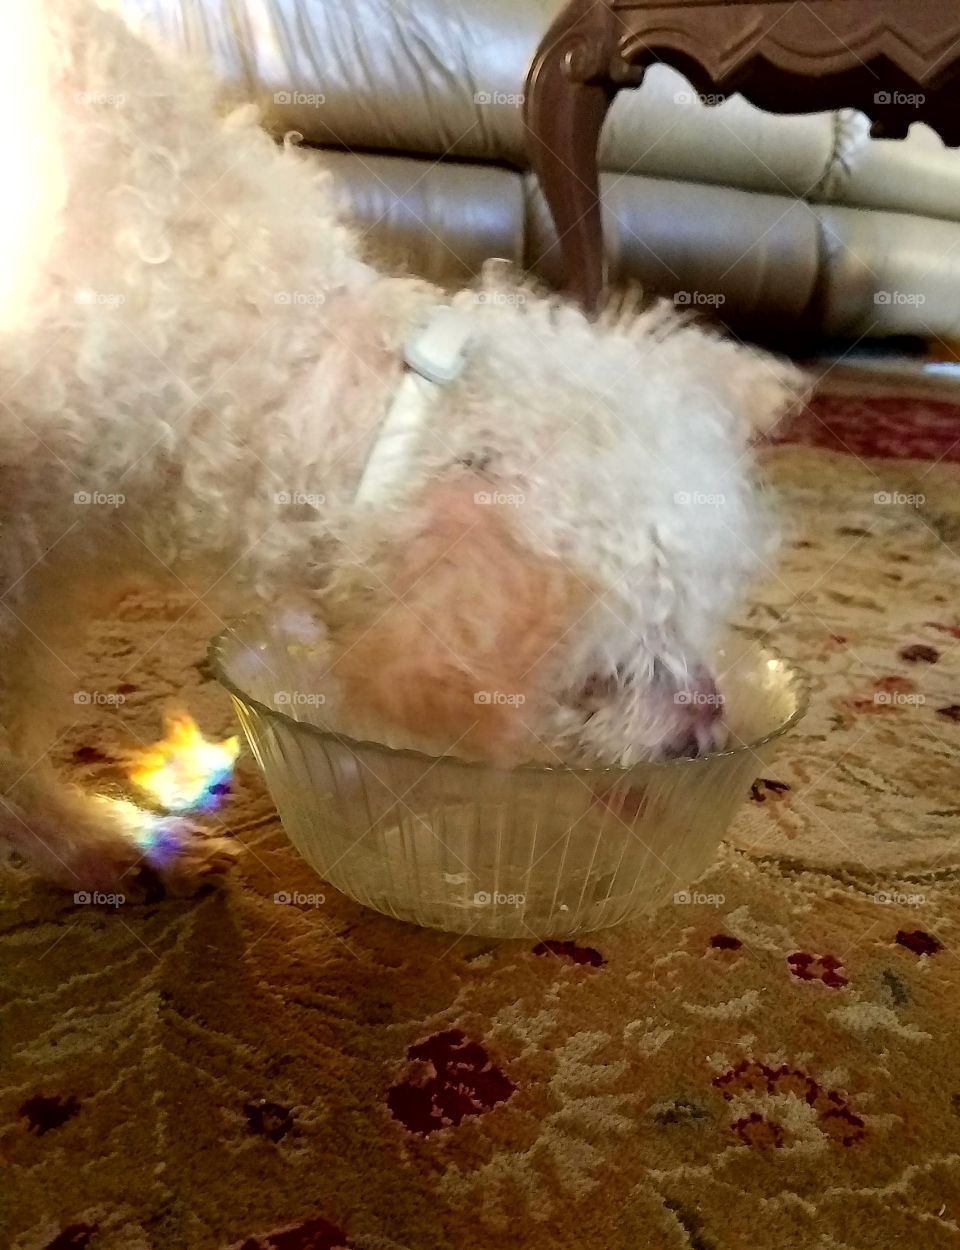 Dog licking leftovers in bowl.